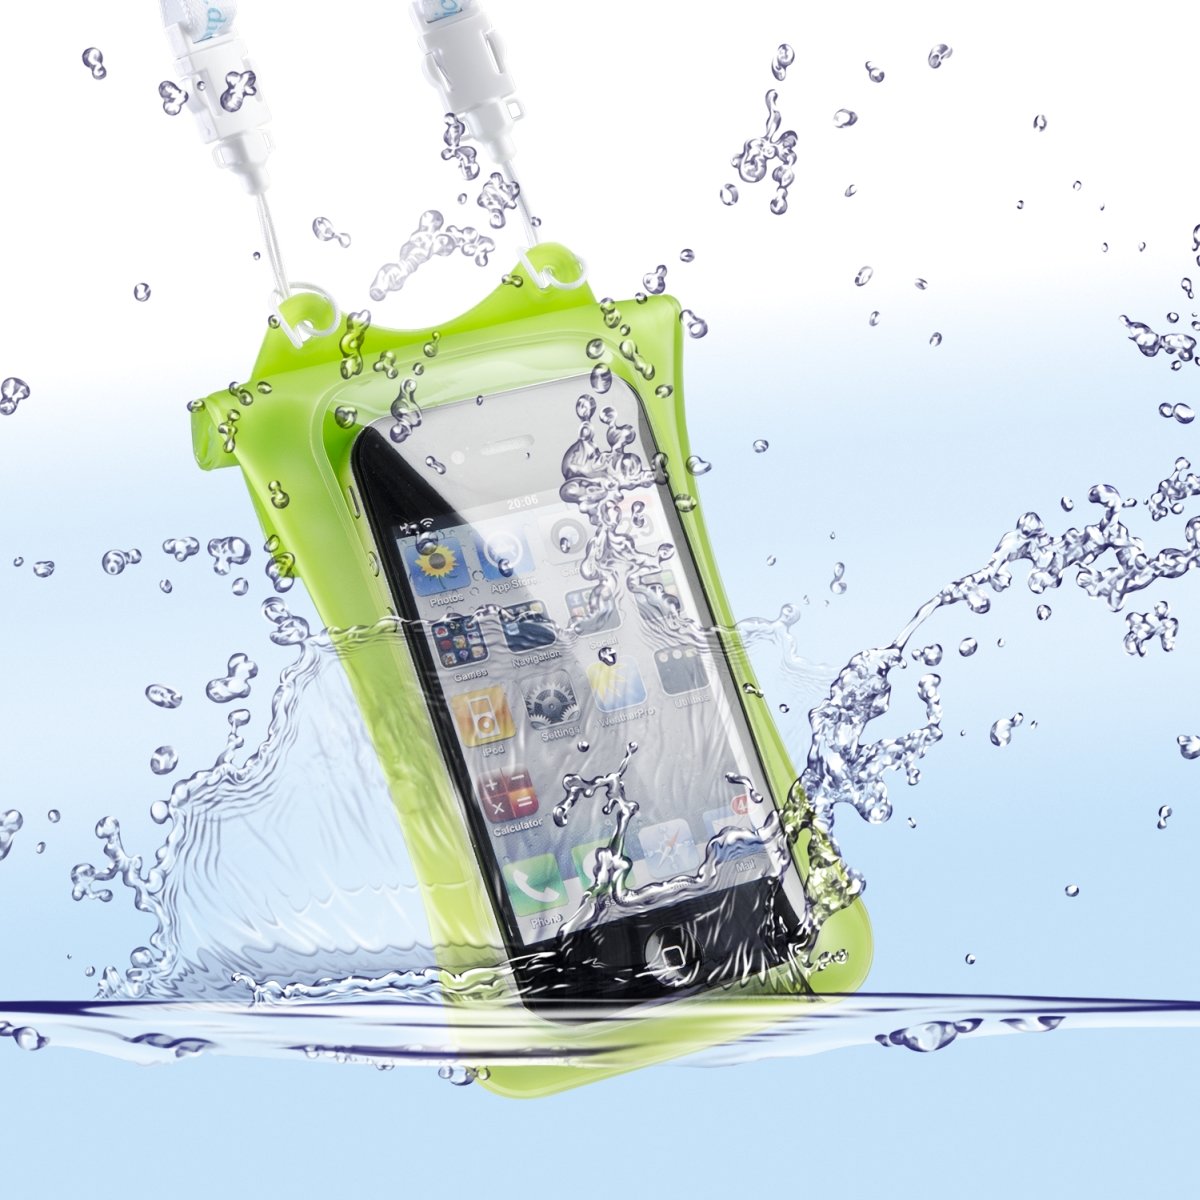 Dicapac USA Inc. WPi10Green Waterproof Case for iPhone  1 Pack  Retail Packaging  Green